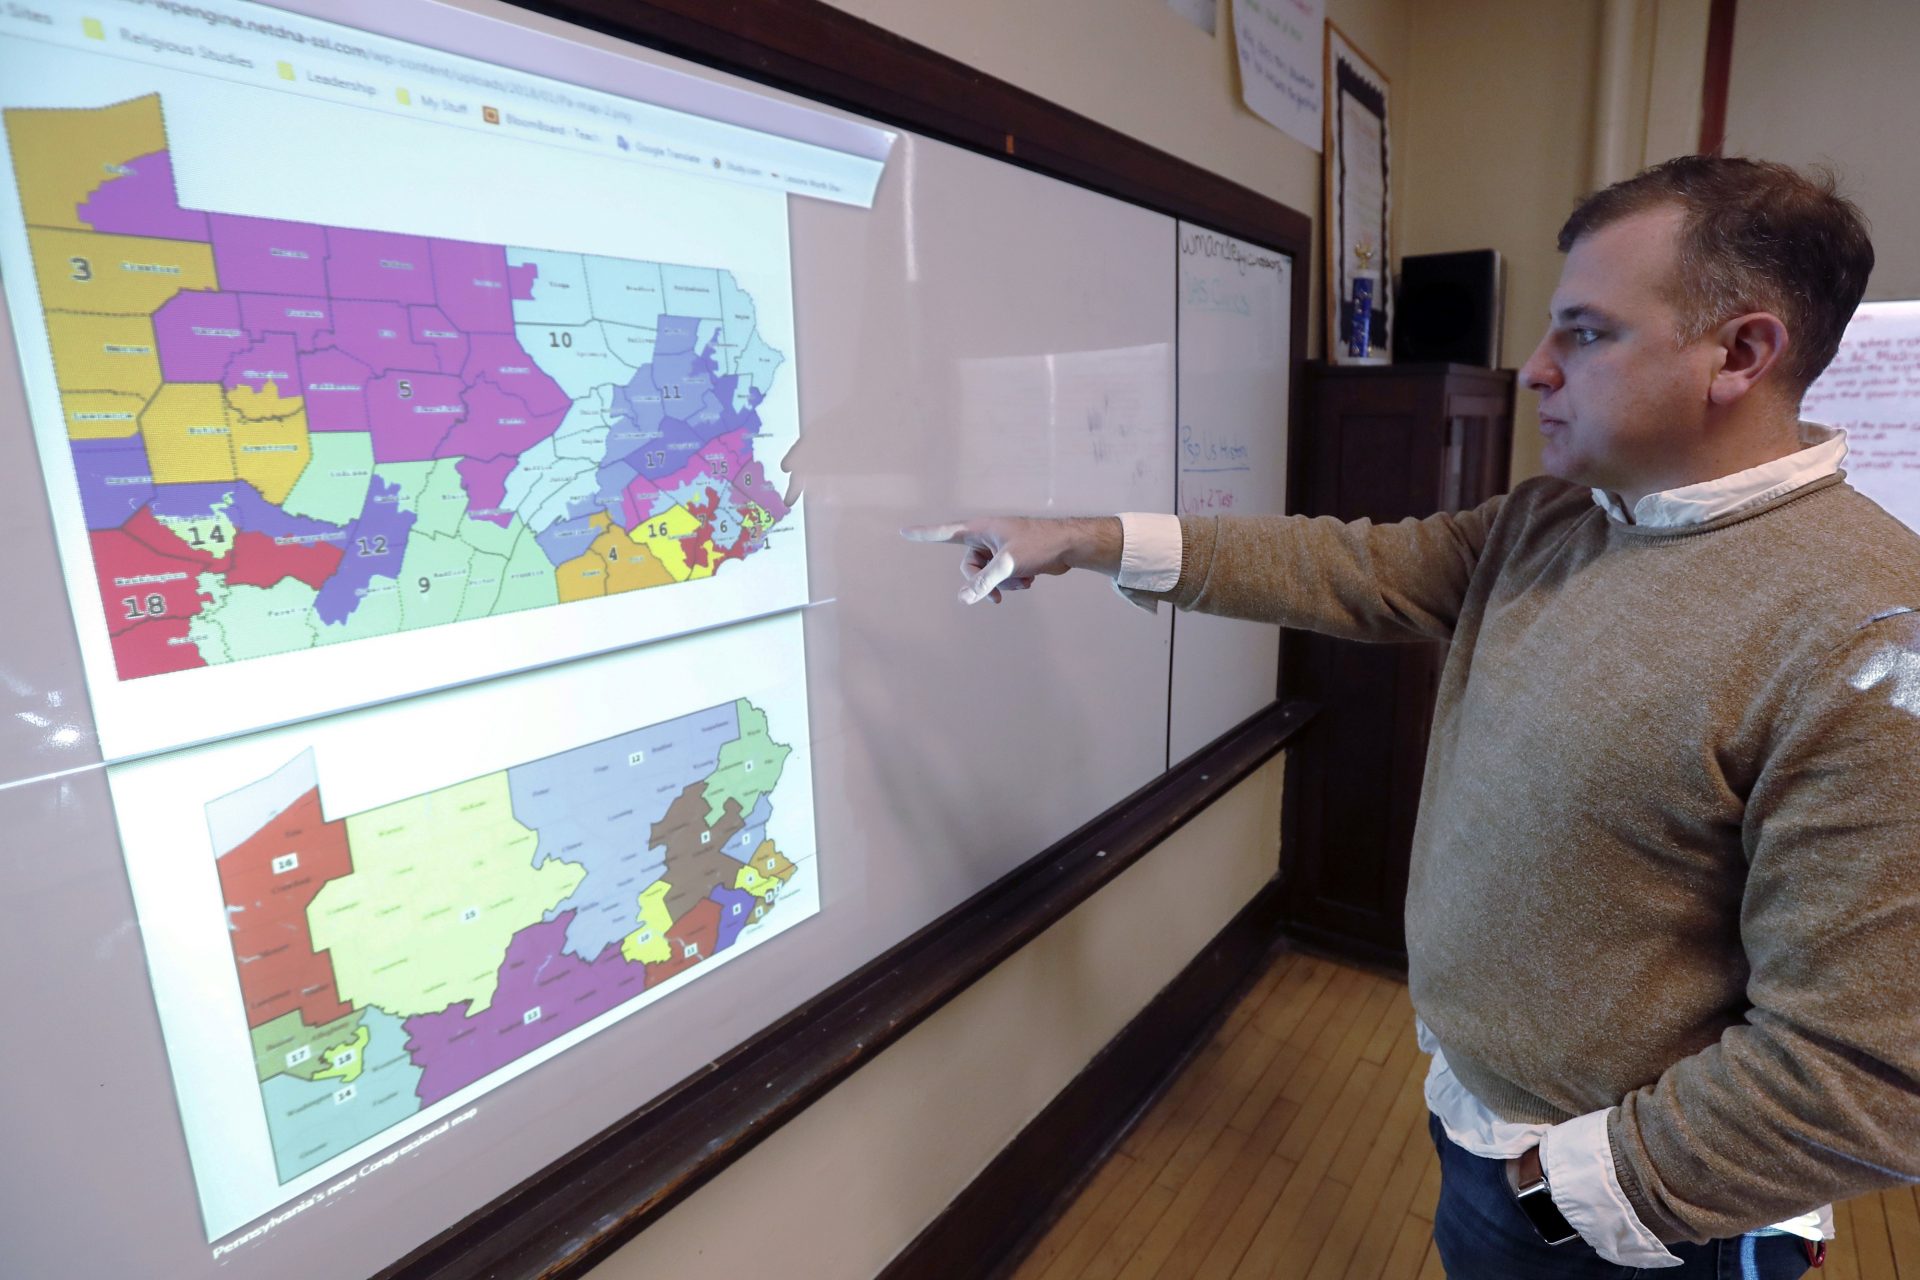 FILE PHOTO: William Marx, points to projected images of the old congressional districts of Pennsylvania on top, and the new re-drawn districts on the bottom, while standing in the classroom where he teaches civics in Pittsburgh on Friday, Nov. 16, 2018.